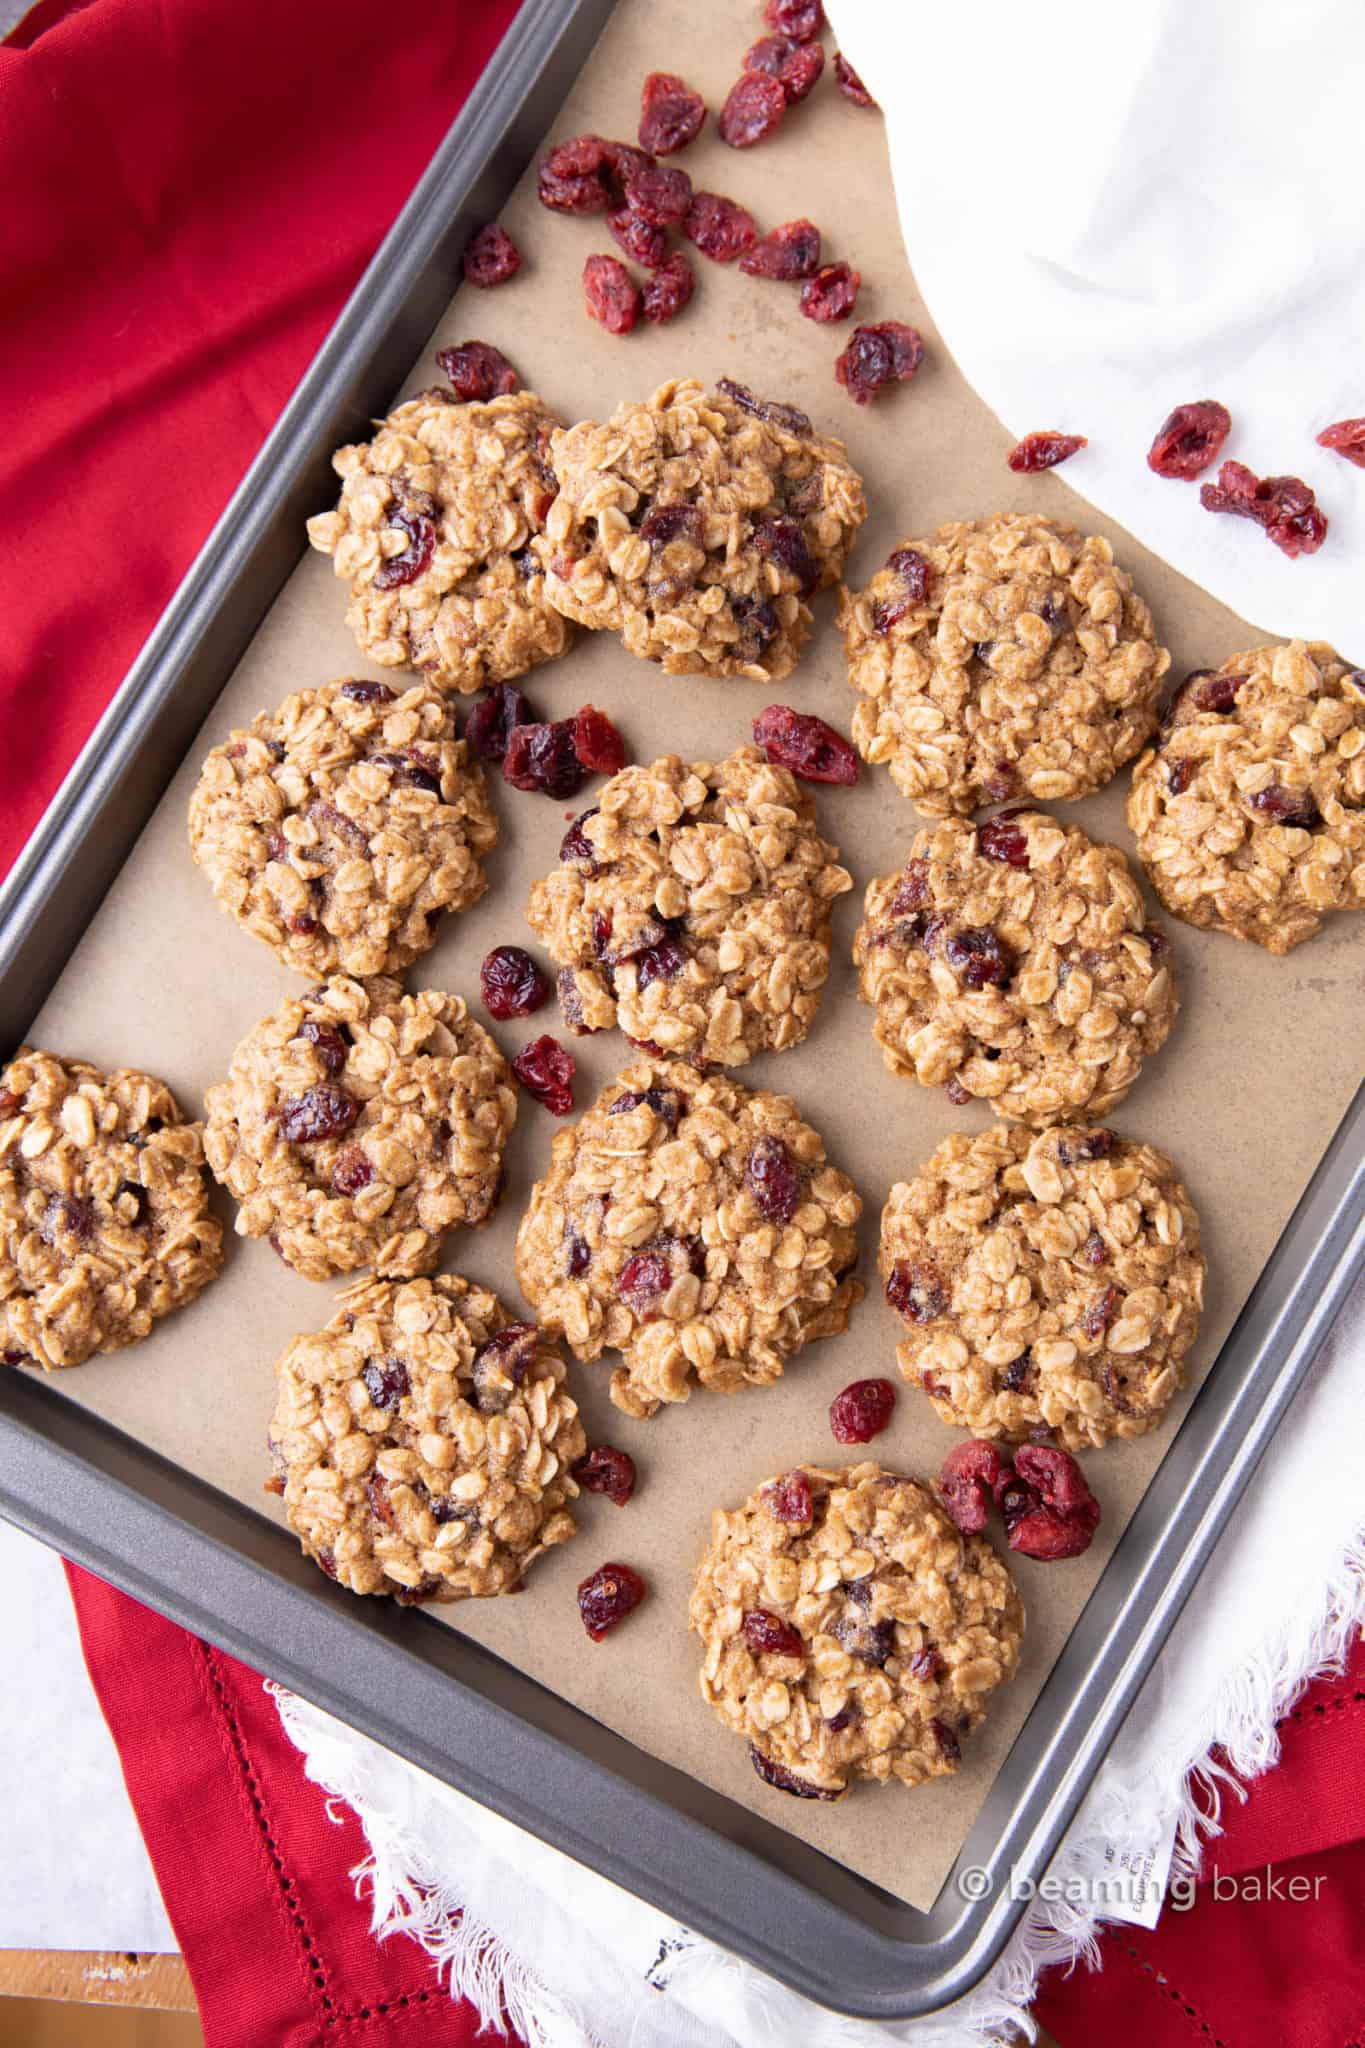 Heart Healthy Vegan Hawthorn Cookies / Pin by Jessica Azbill on Baker at Heart in 2020 | Low carb ...